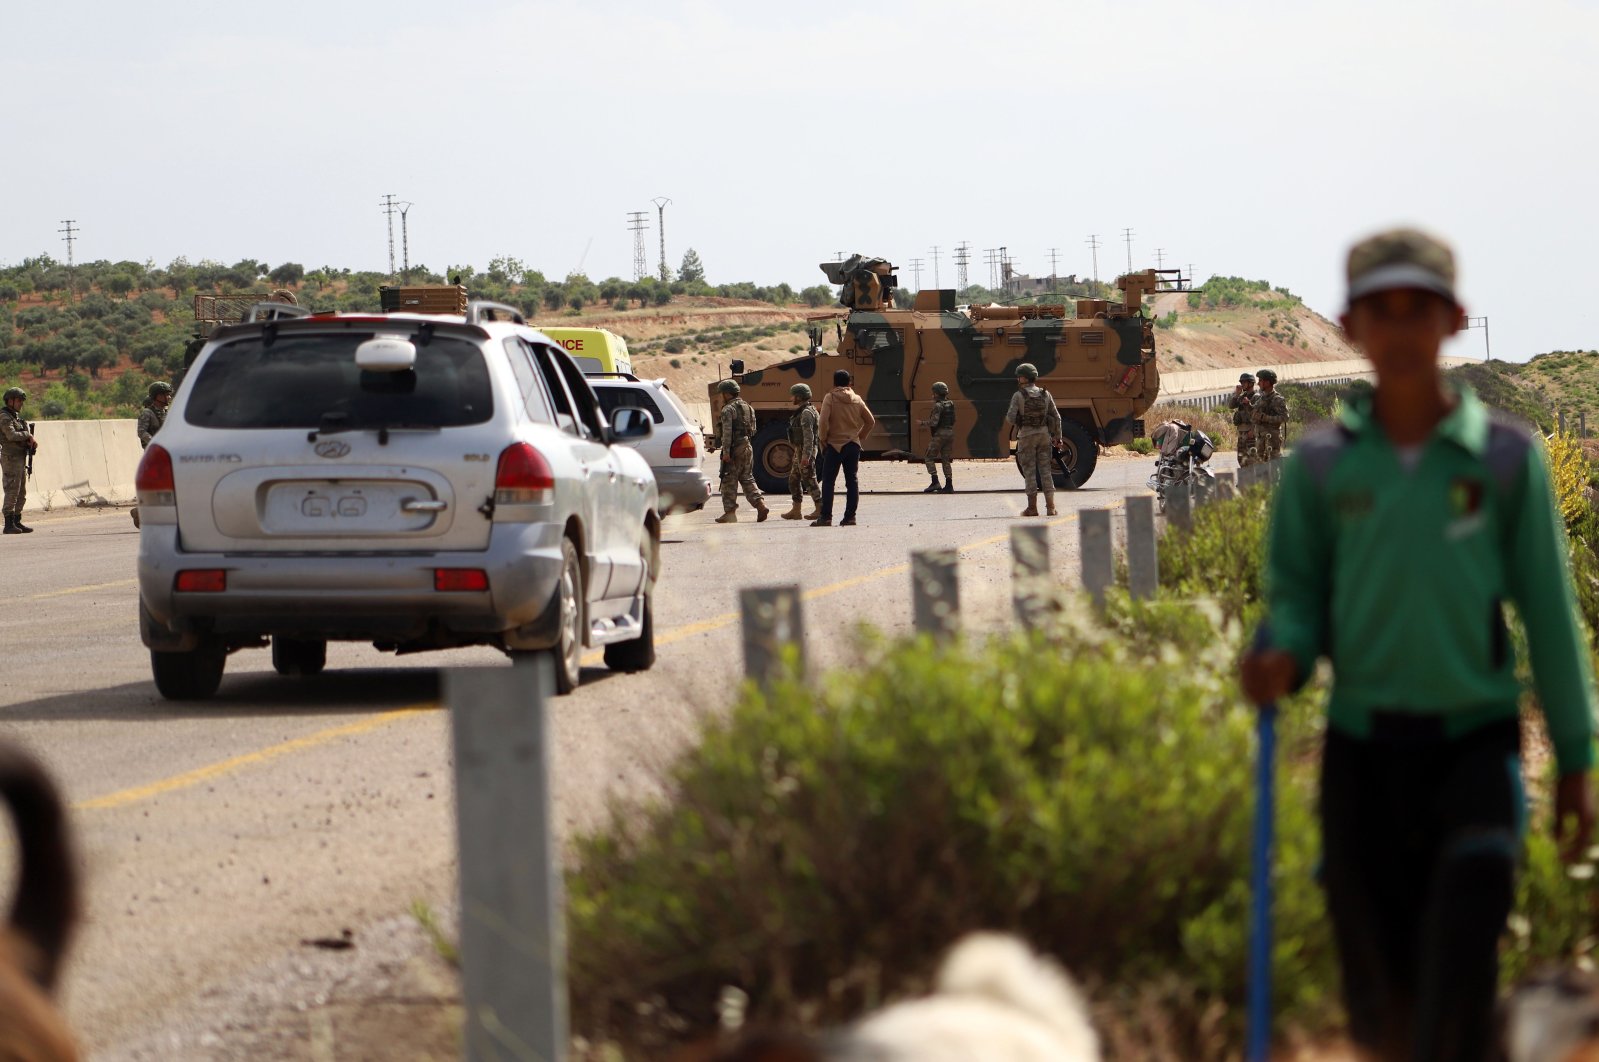 A shepherd boy leads his flock near Turkish soldiers standing outside an armored vehicle, part of a joint Turkish-Russian military patrol, along the M4 highway in Ariha in the opposition-held northwestern Syrian province of Idlib, June 2, 2020. (AFP Photo)